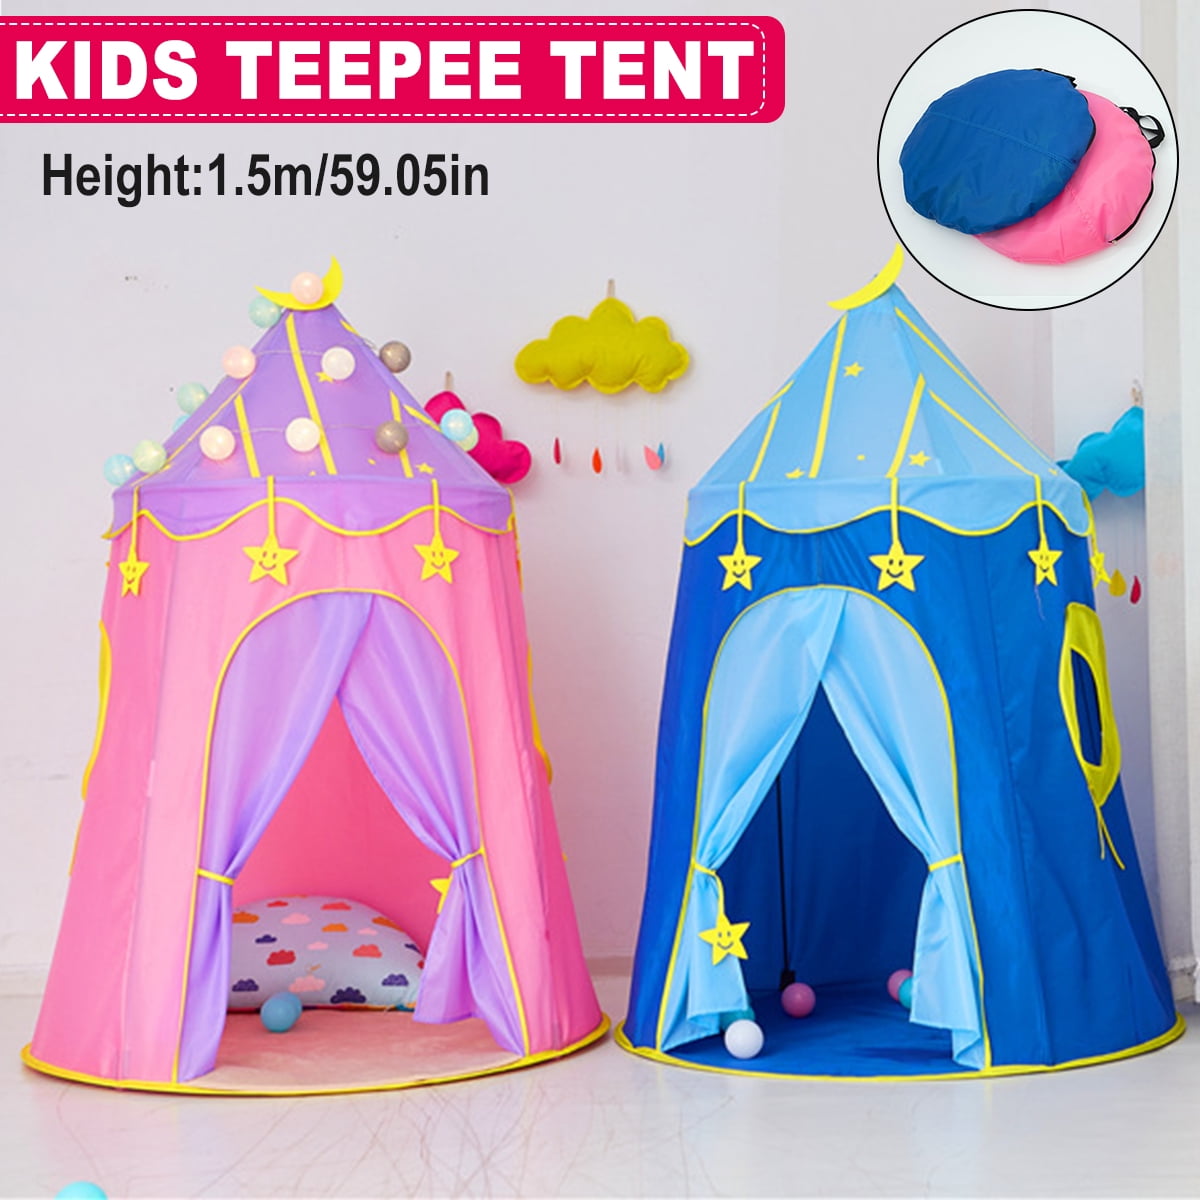 Details about   Kids Tent Toy Prince Playhouse Toddler Play House Castle Tent for Boys and Girls 